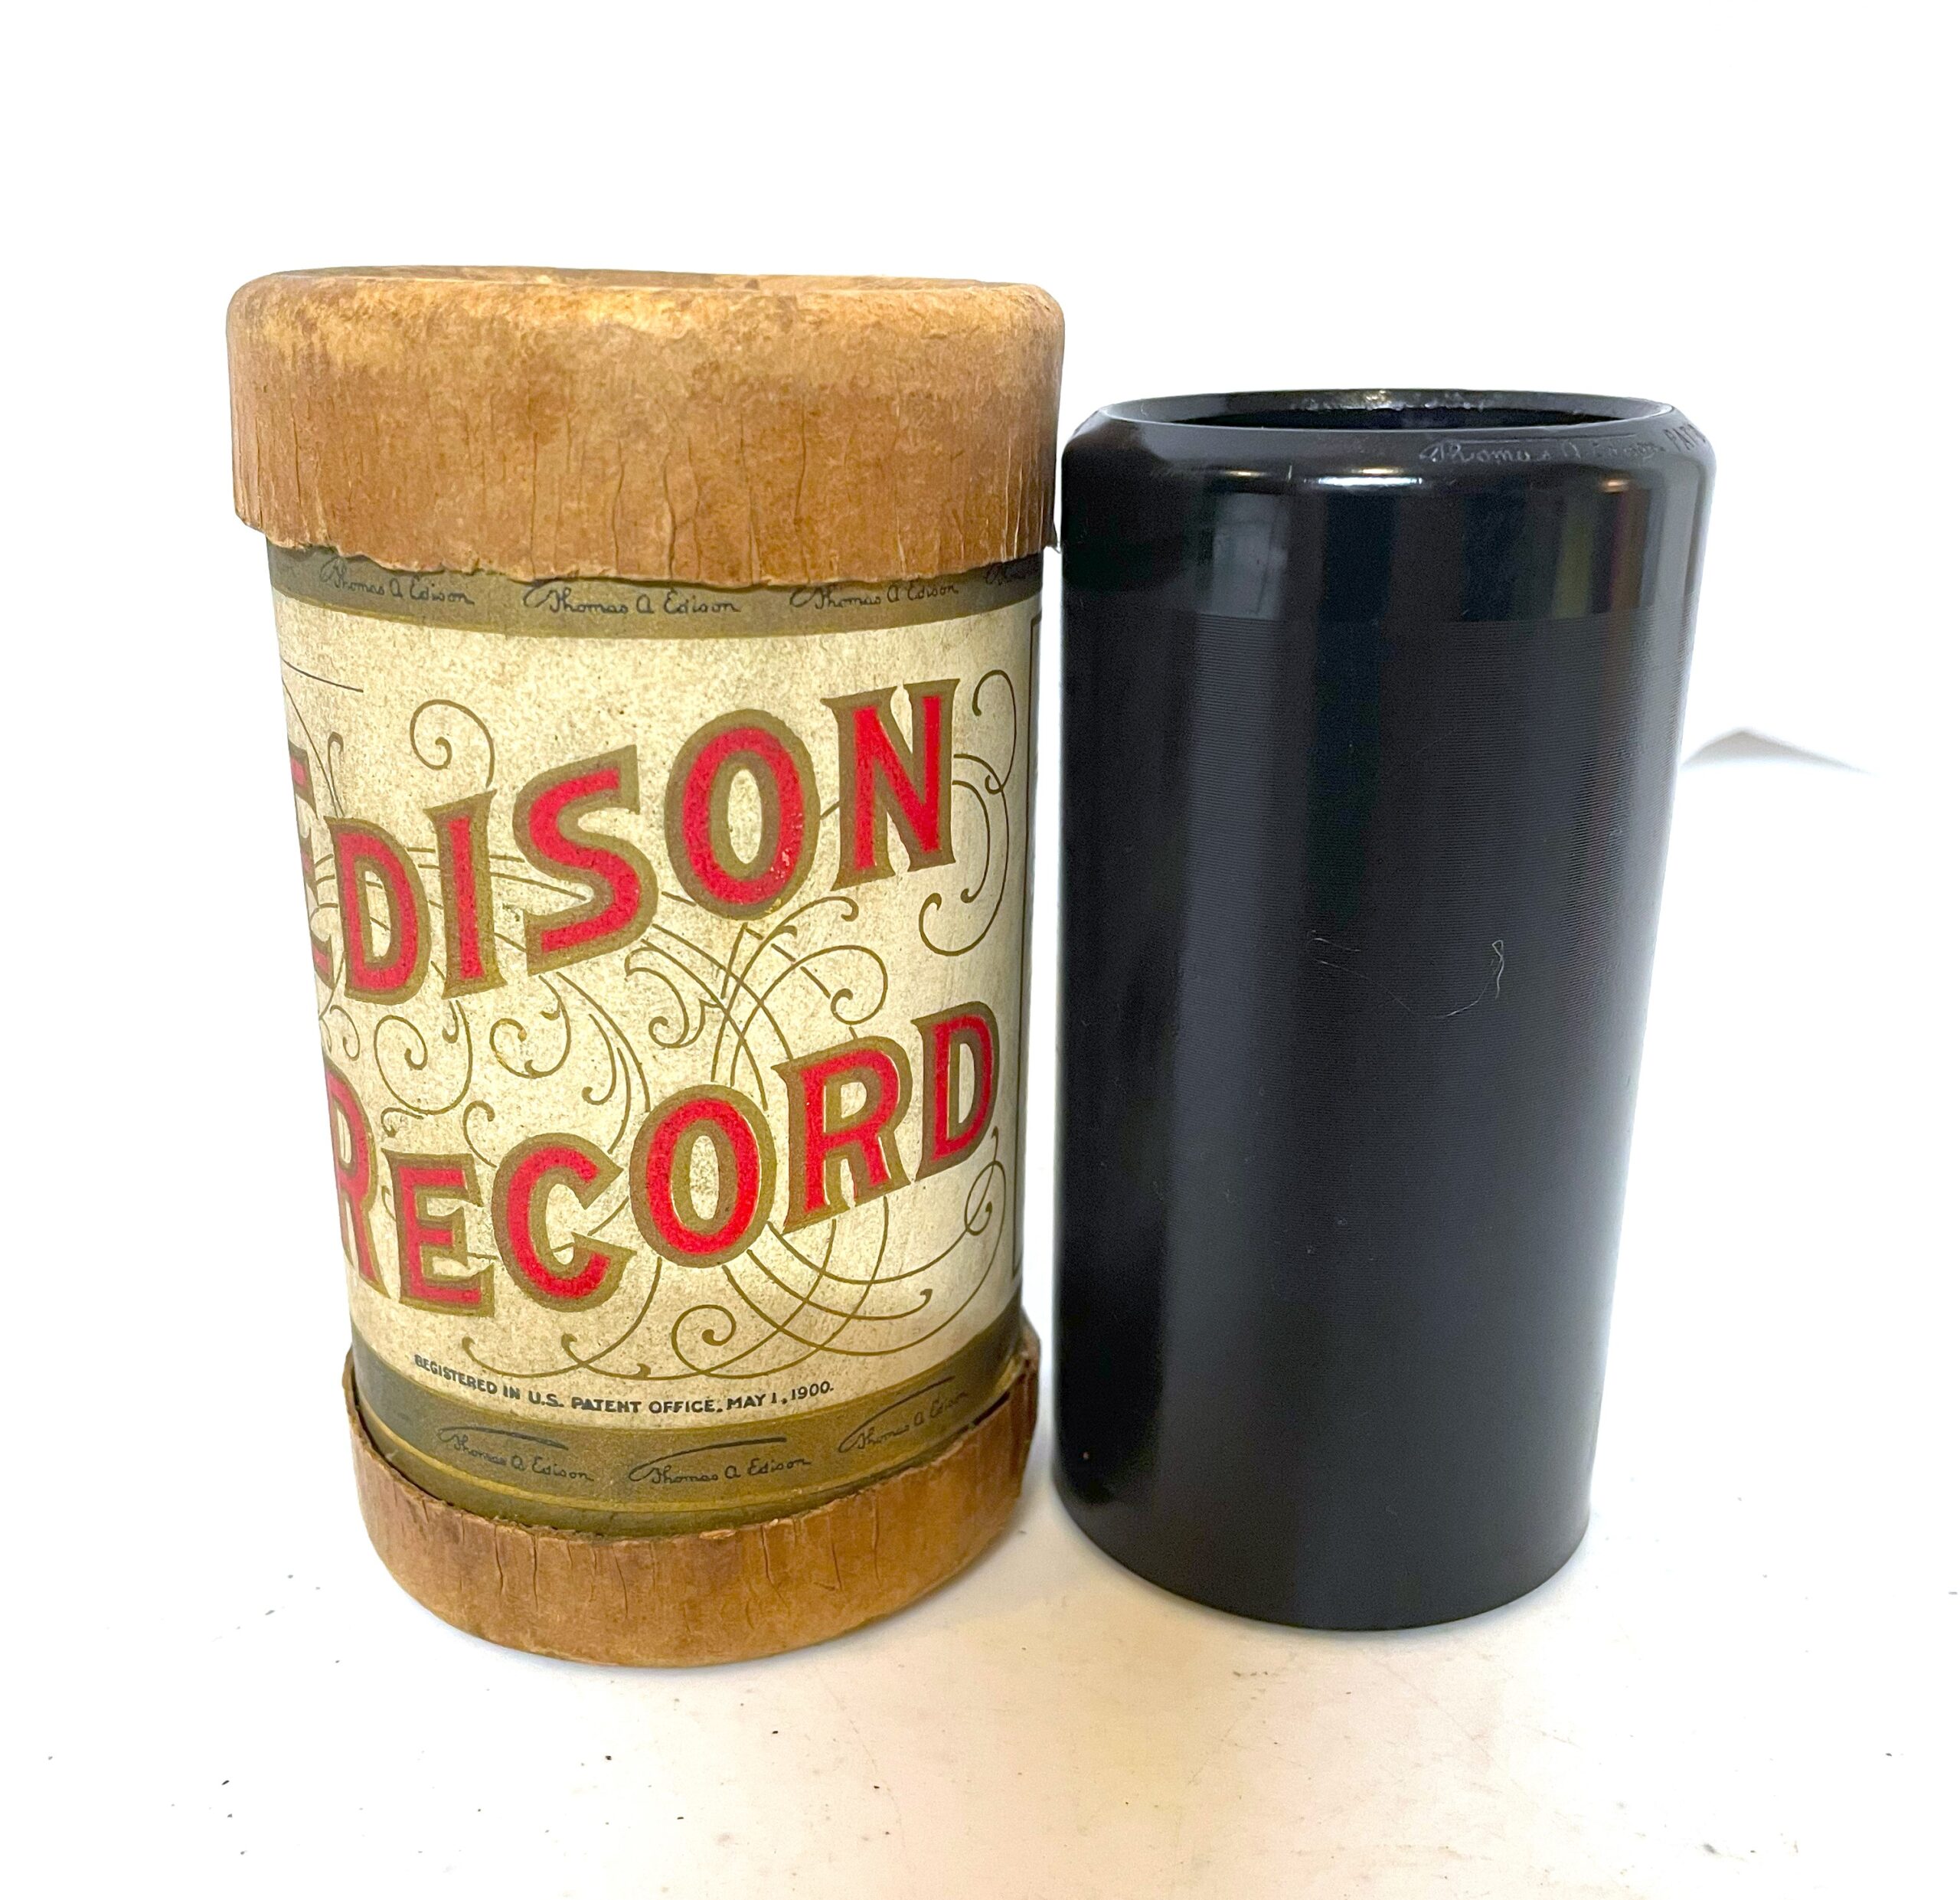 Edison 2-minute Cylinder…” Meet me in Rosetime, Rosie” (Upbeat song!)